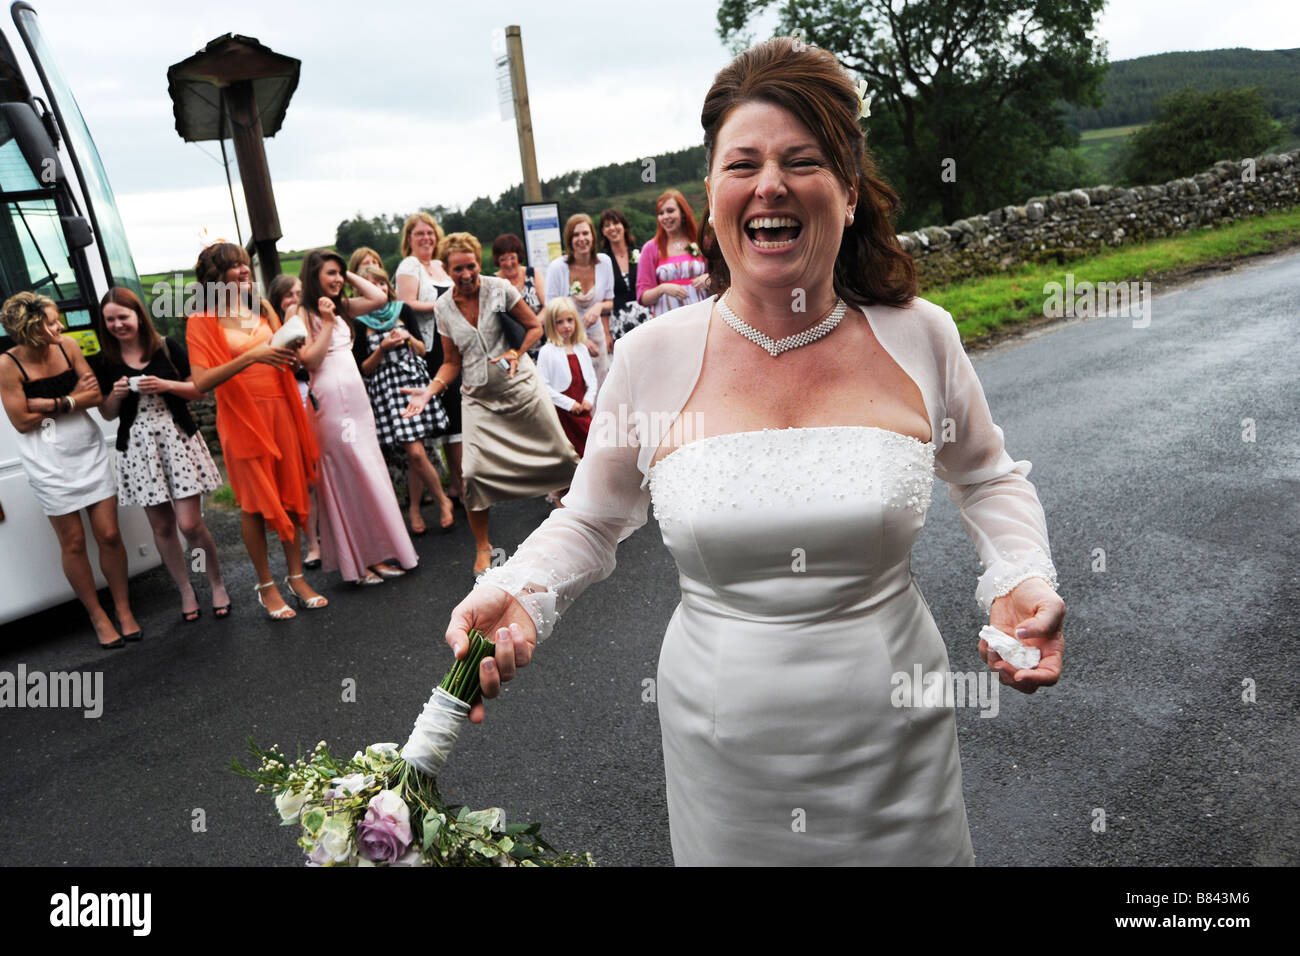 A bride throws her bouquet to wedding guests North Yorkshire Stock Photo